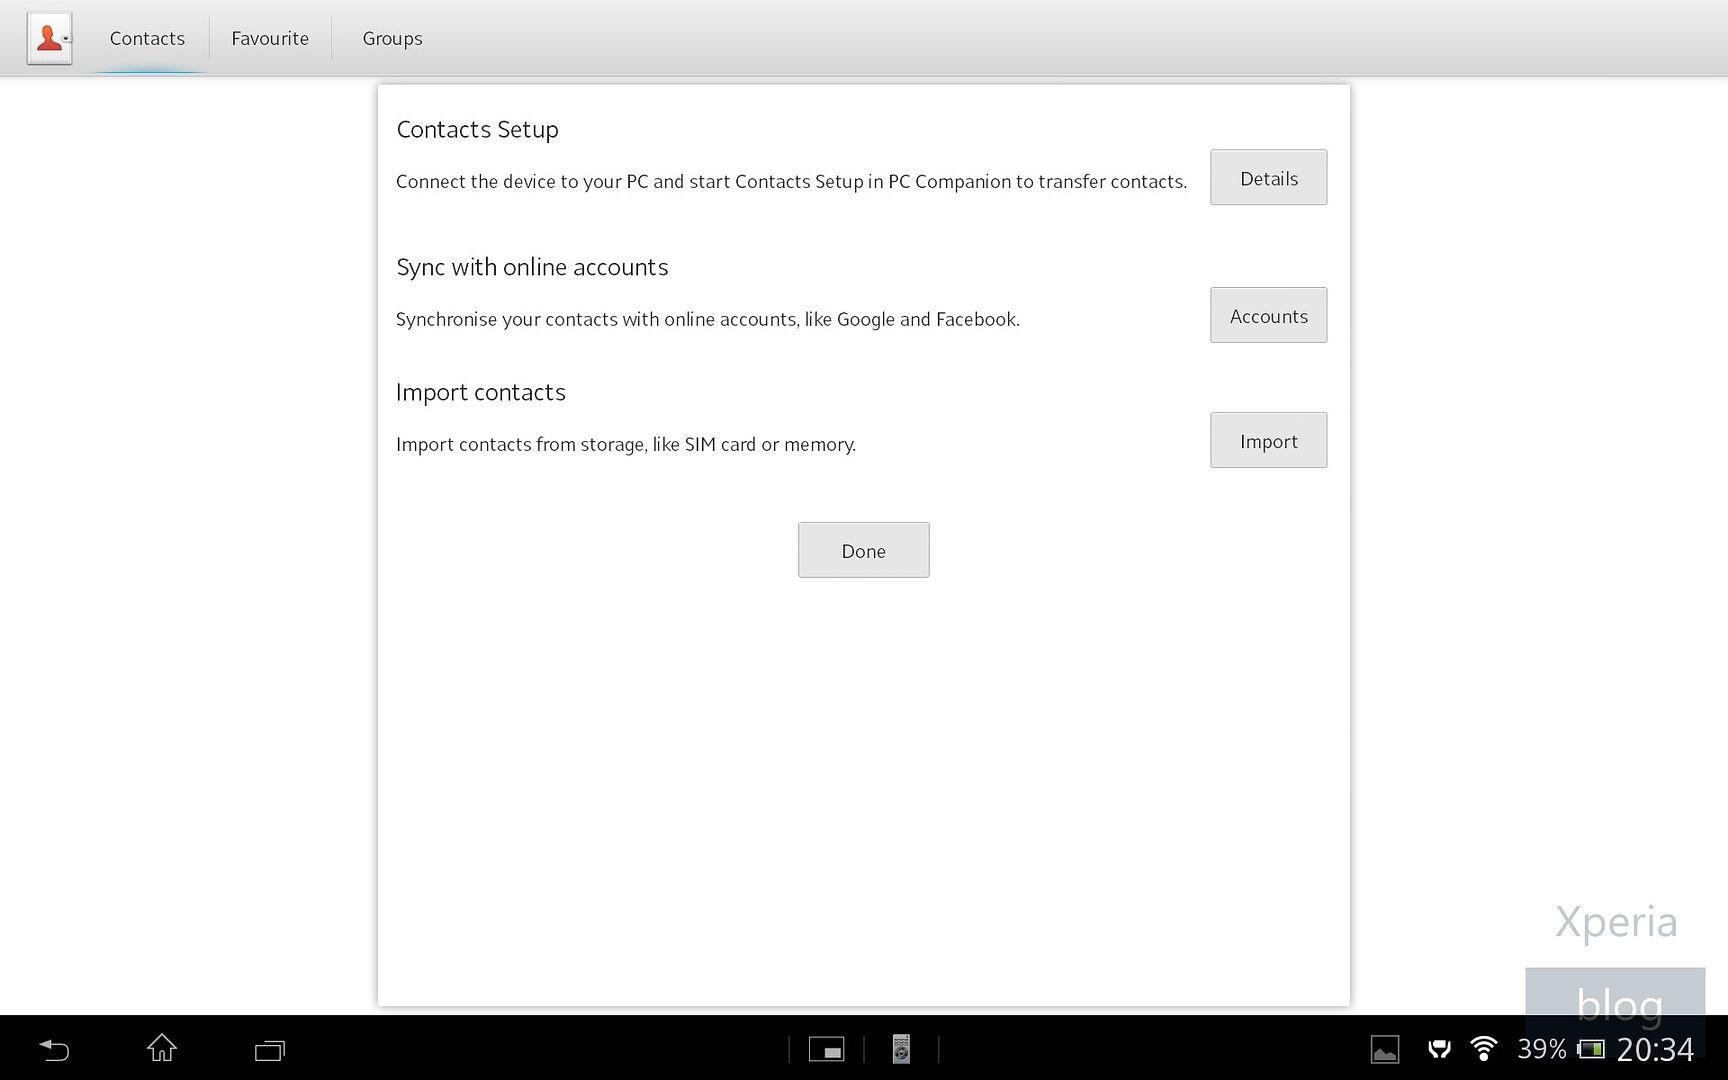 Xperia Tablet Z - How to access the service menu